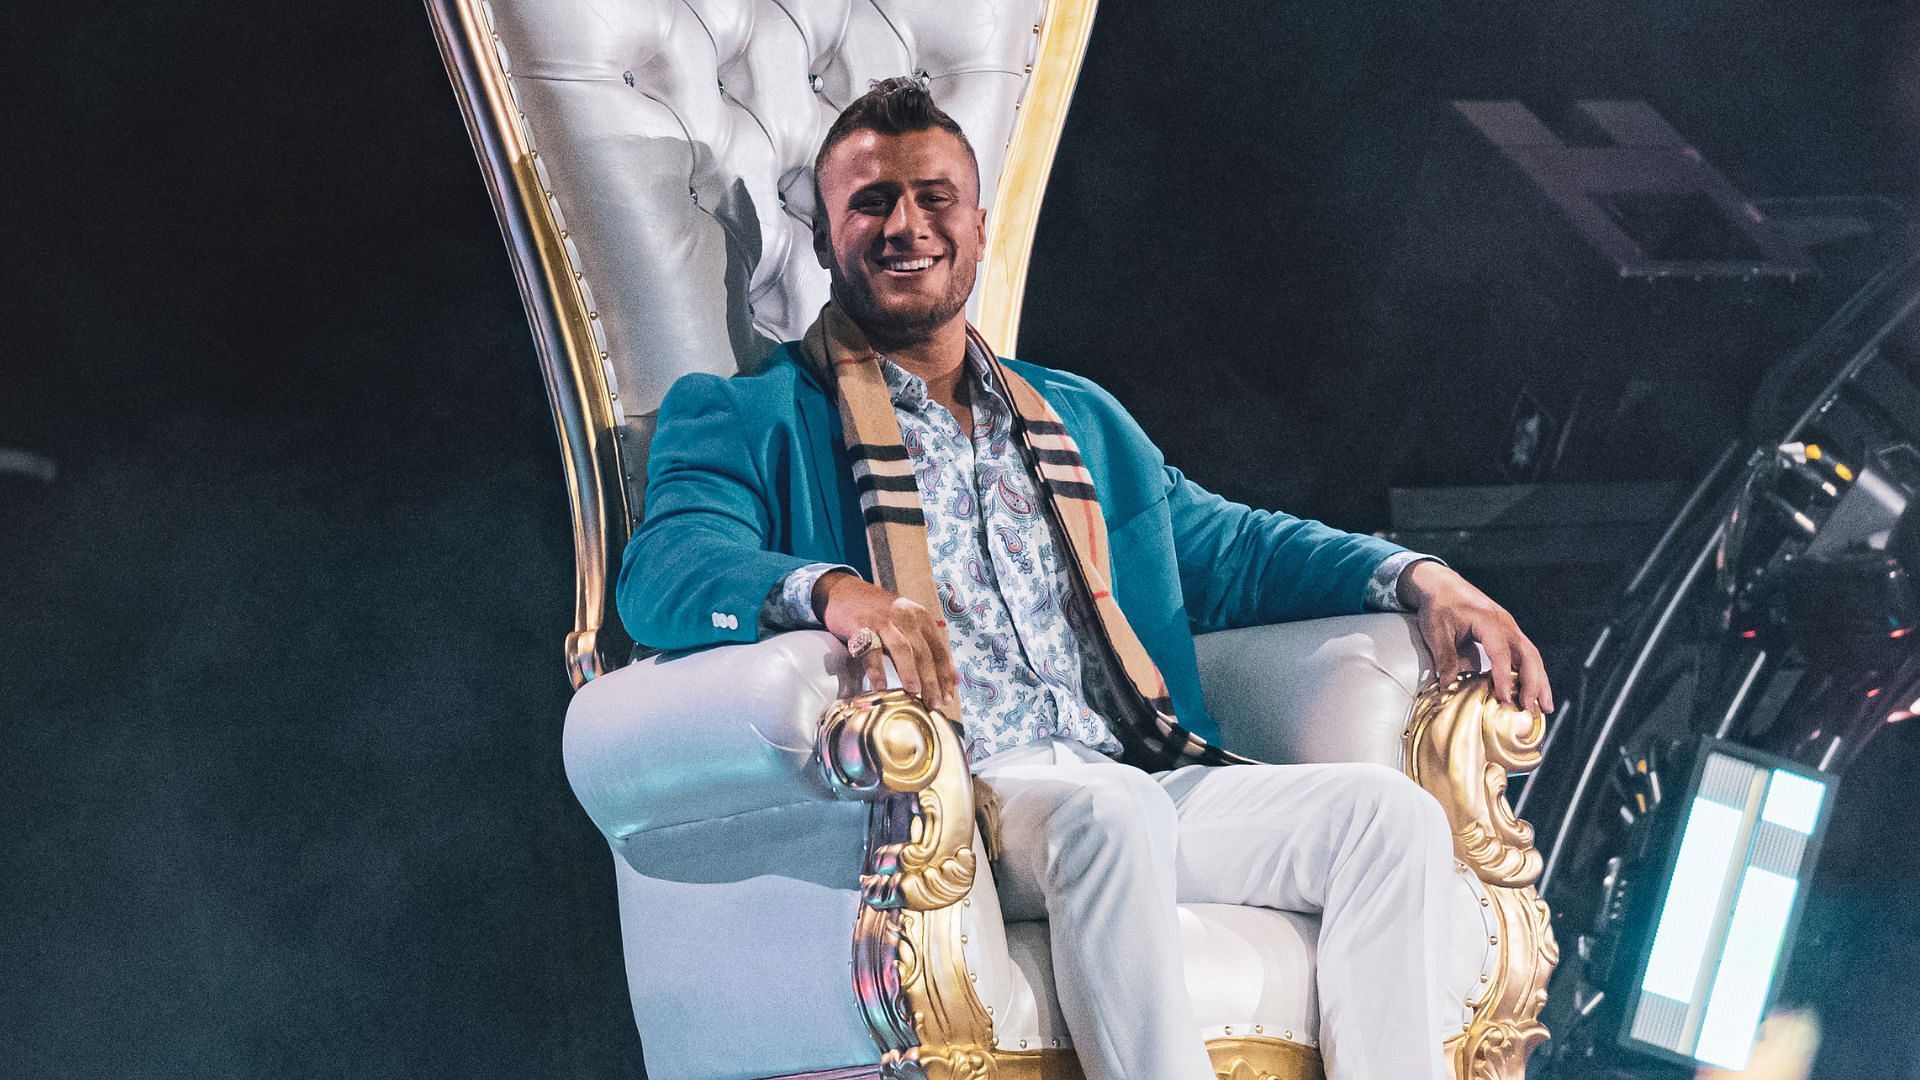 MJF is very happy with what he did on AEW Dynamite